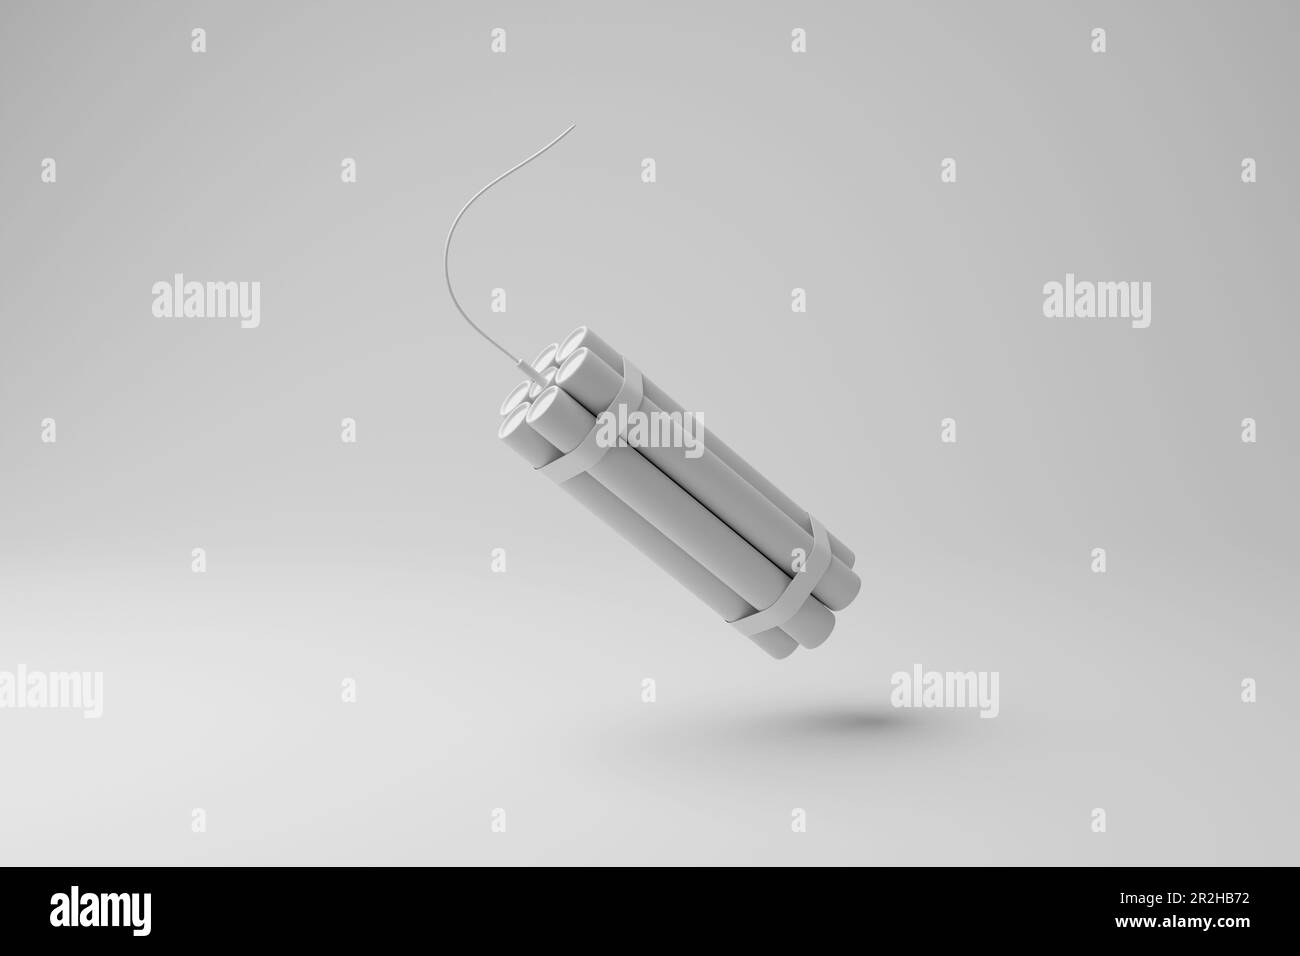 Bundle of dynamite sticks floating in mid air with shadow on white background in monochrome. The concept of explosion, terrorism and violence Stock Photo